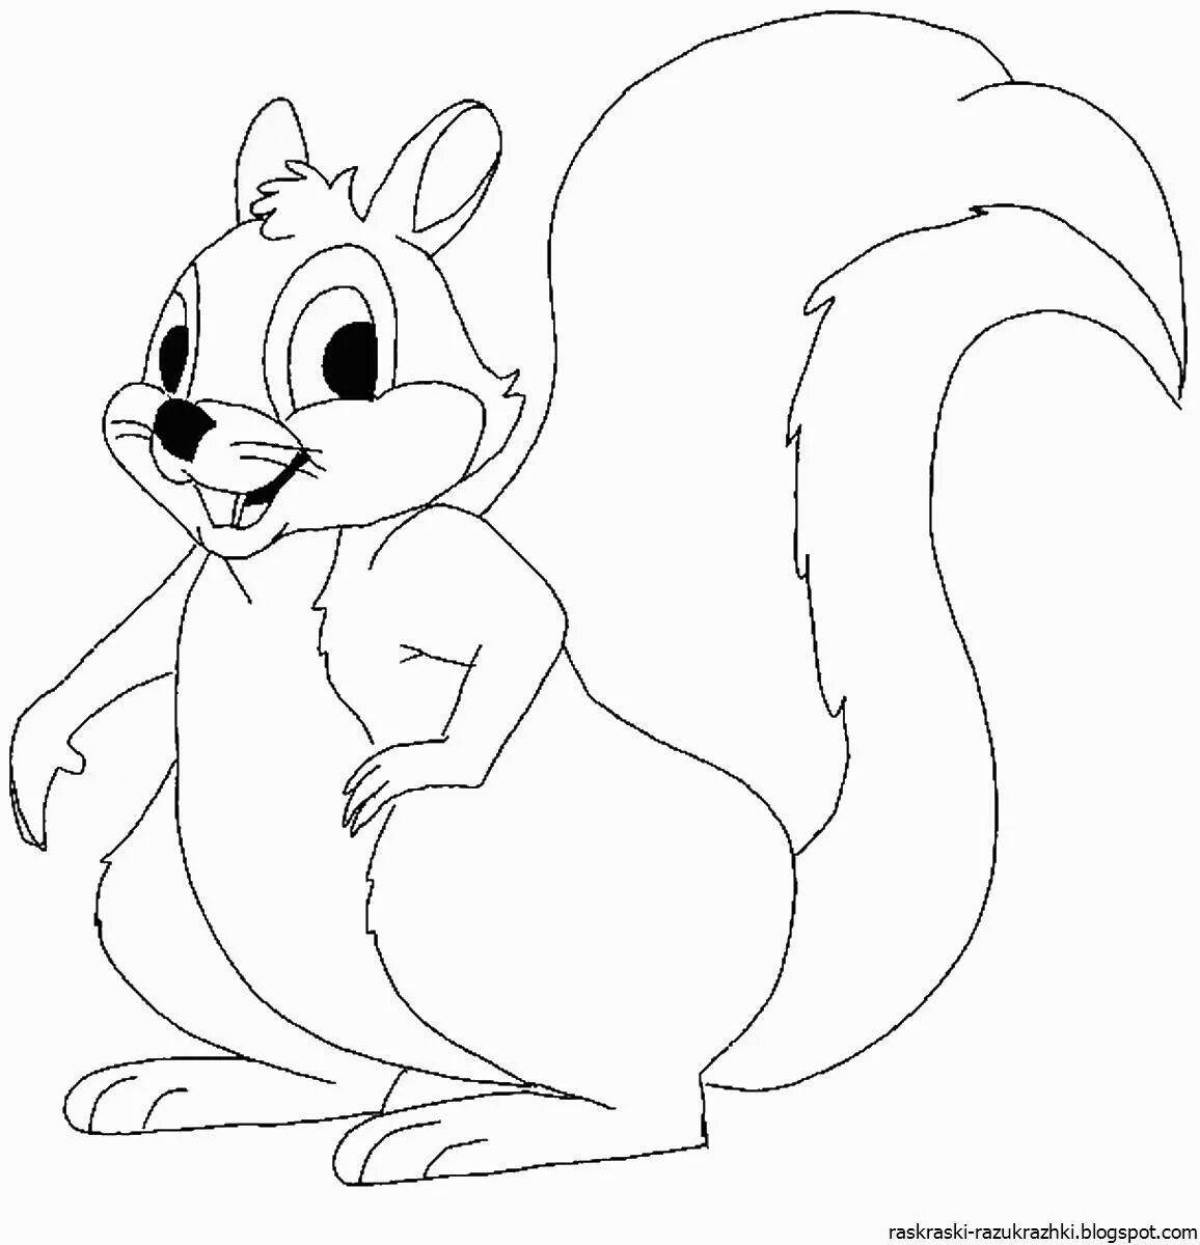 Exciting squirrel coloring